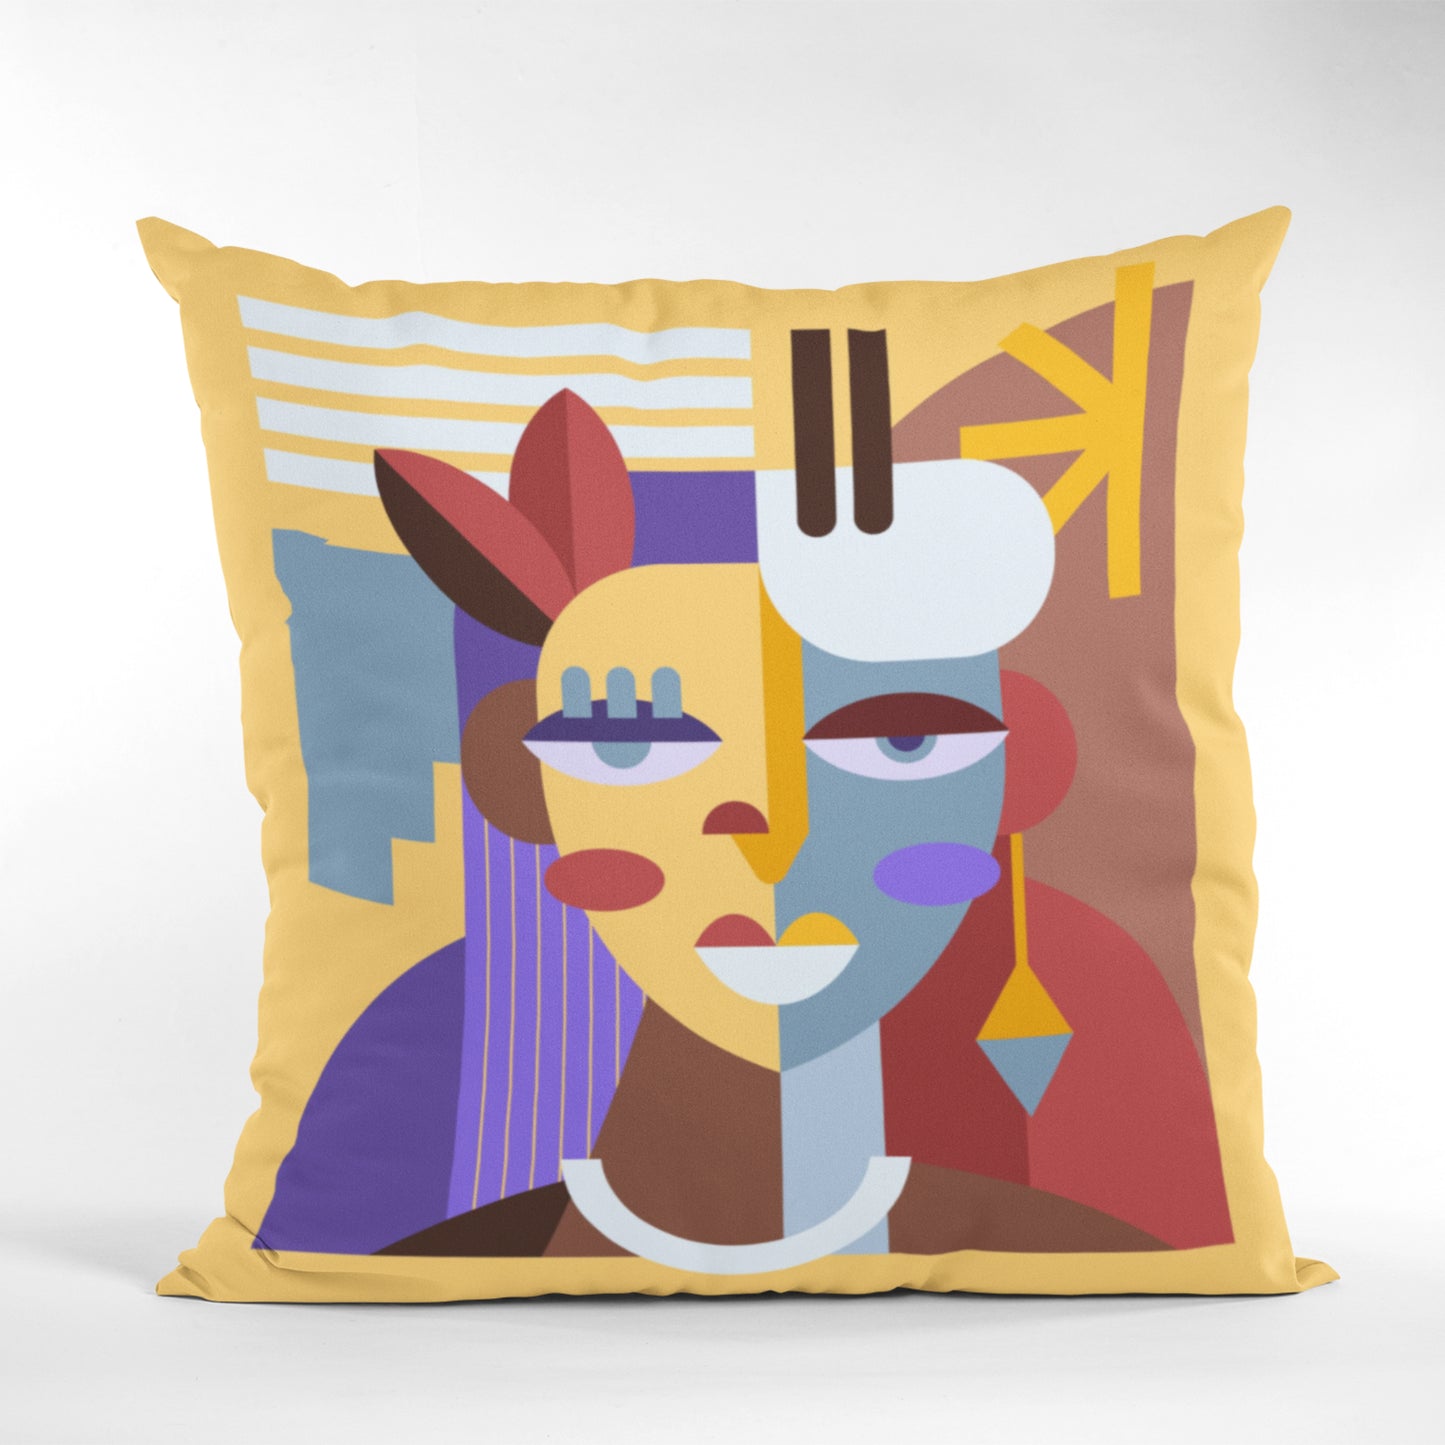 Abstract Face Throw Pillow, Boho Home Decor Cushion Cover by Homeezone